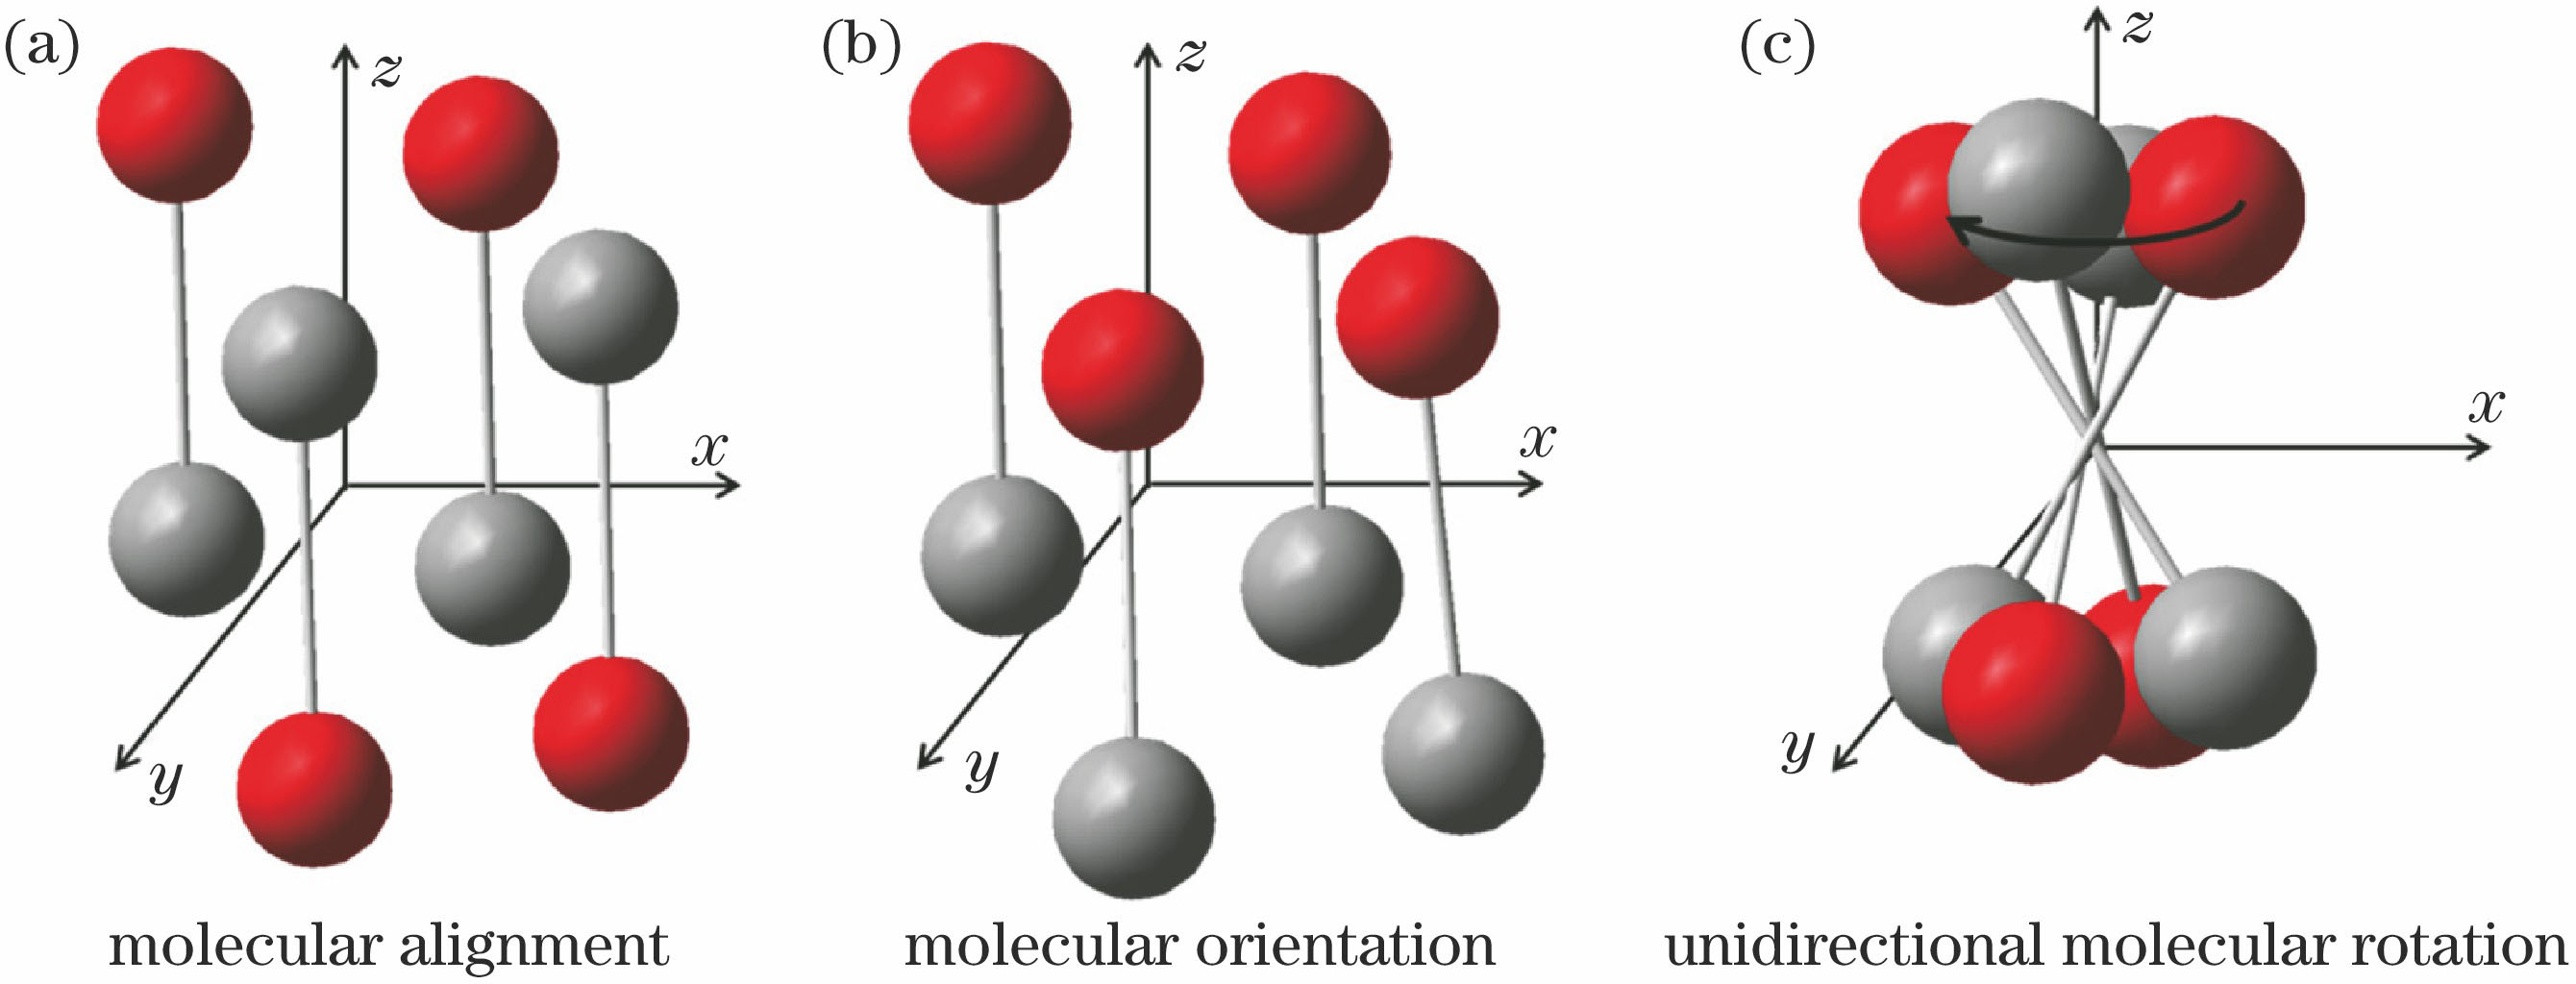 Schematics of (a) molecular alignment, (b) orientation and (c) unidirectional rotation irradiated by ultrafast laser